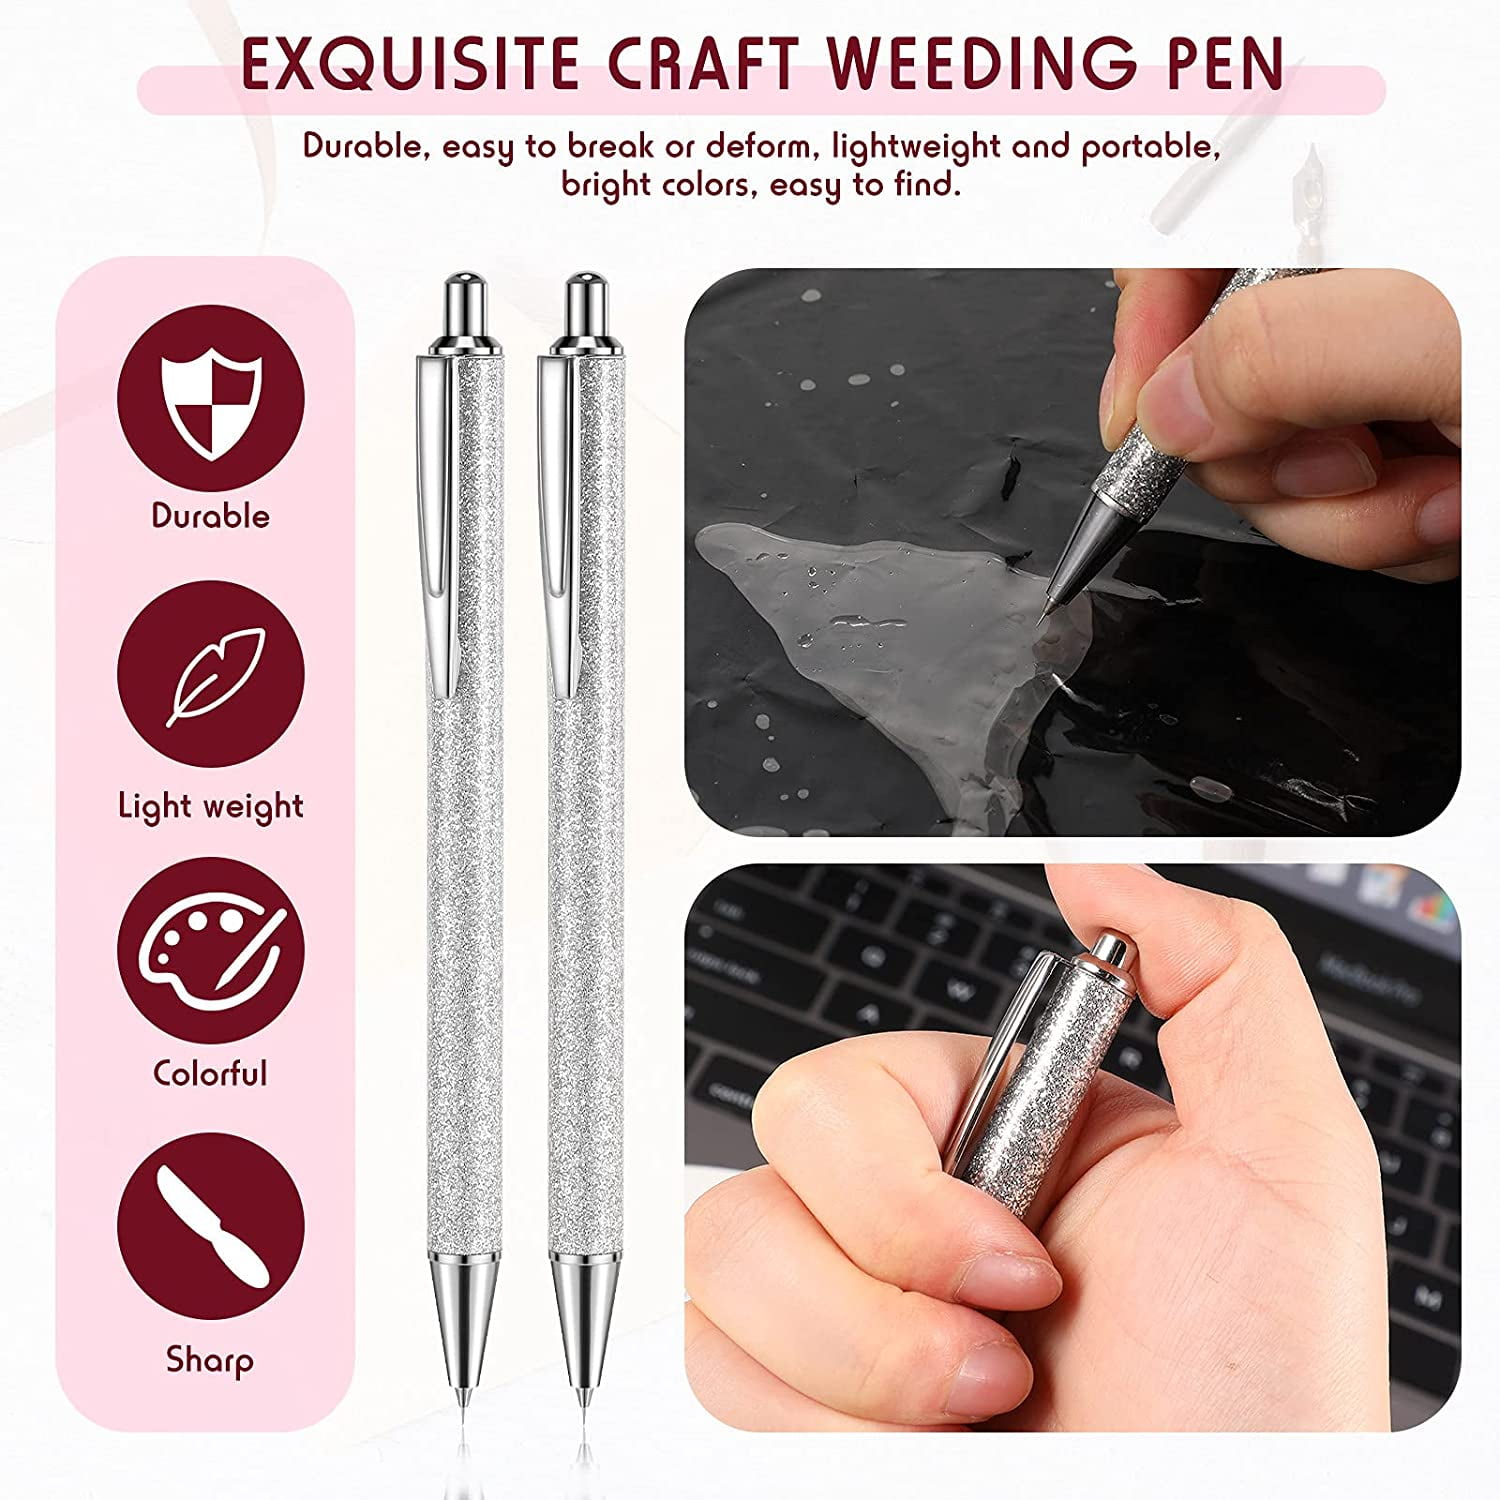 3 Pack Craft Weeding Pens, Essential Adhesive Vinyl Tool, Precision Needle Retractable Pin Pen for Craft Weeding, Vinyl Air Release or Car